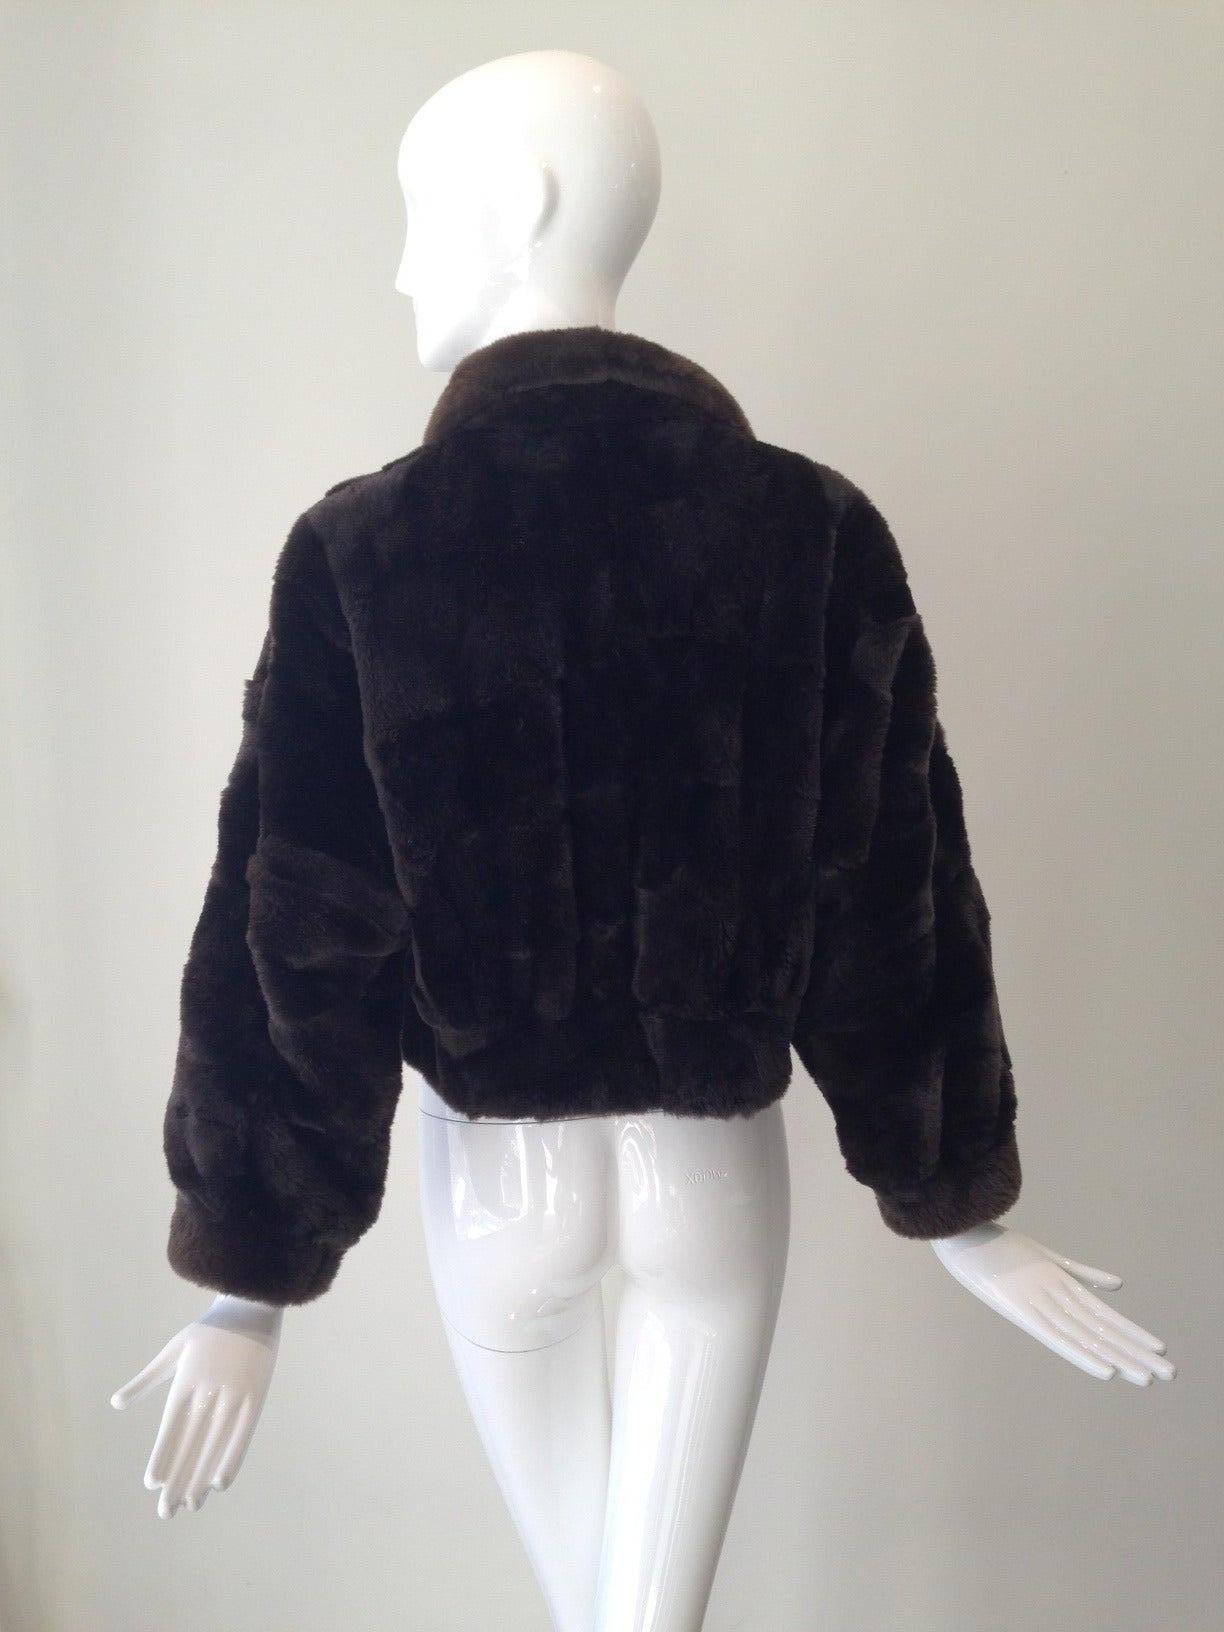 Brown Nutria fur jacket. 3/4 Sleeves. Fur is in excellent condition
Size : 4-6